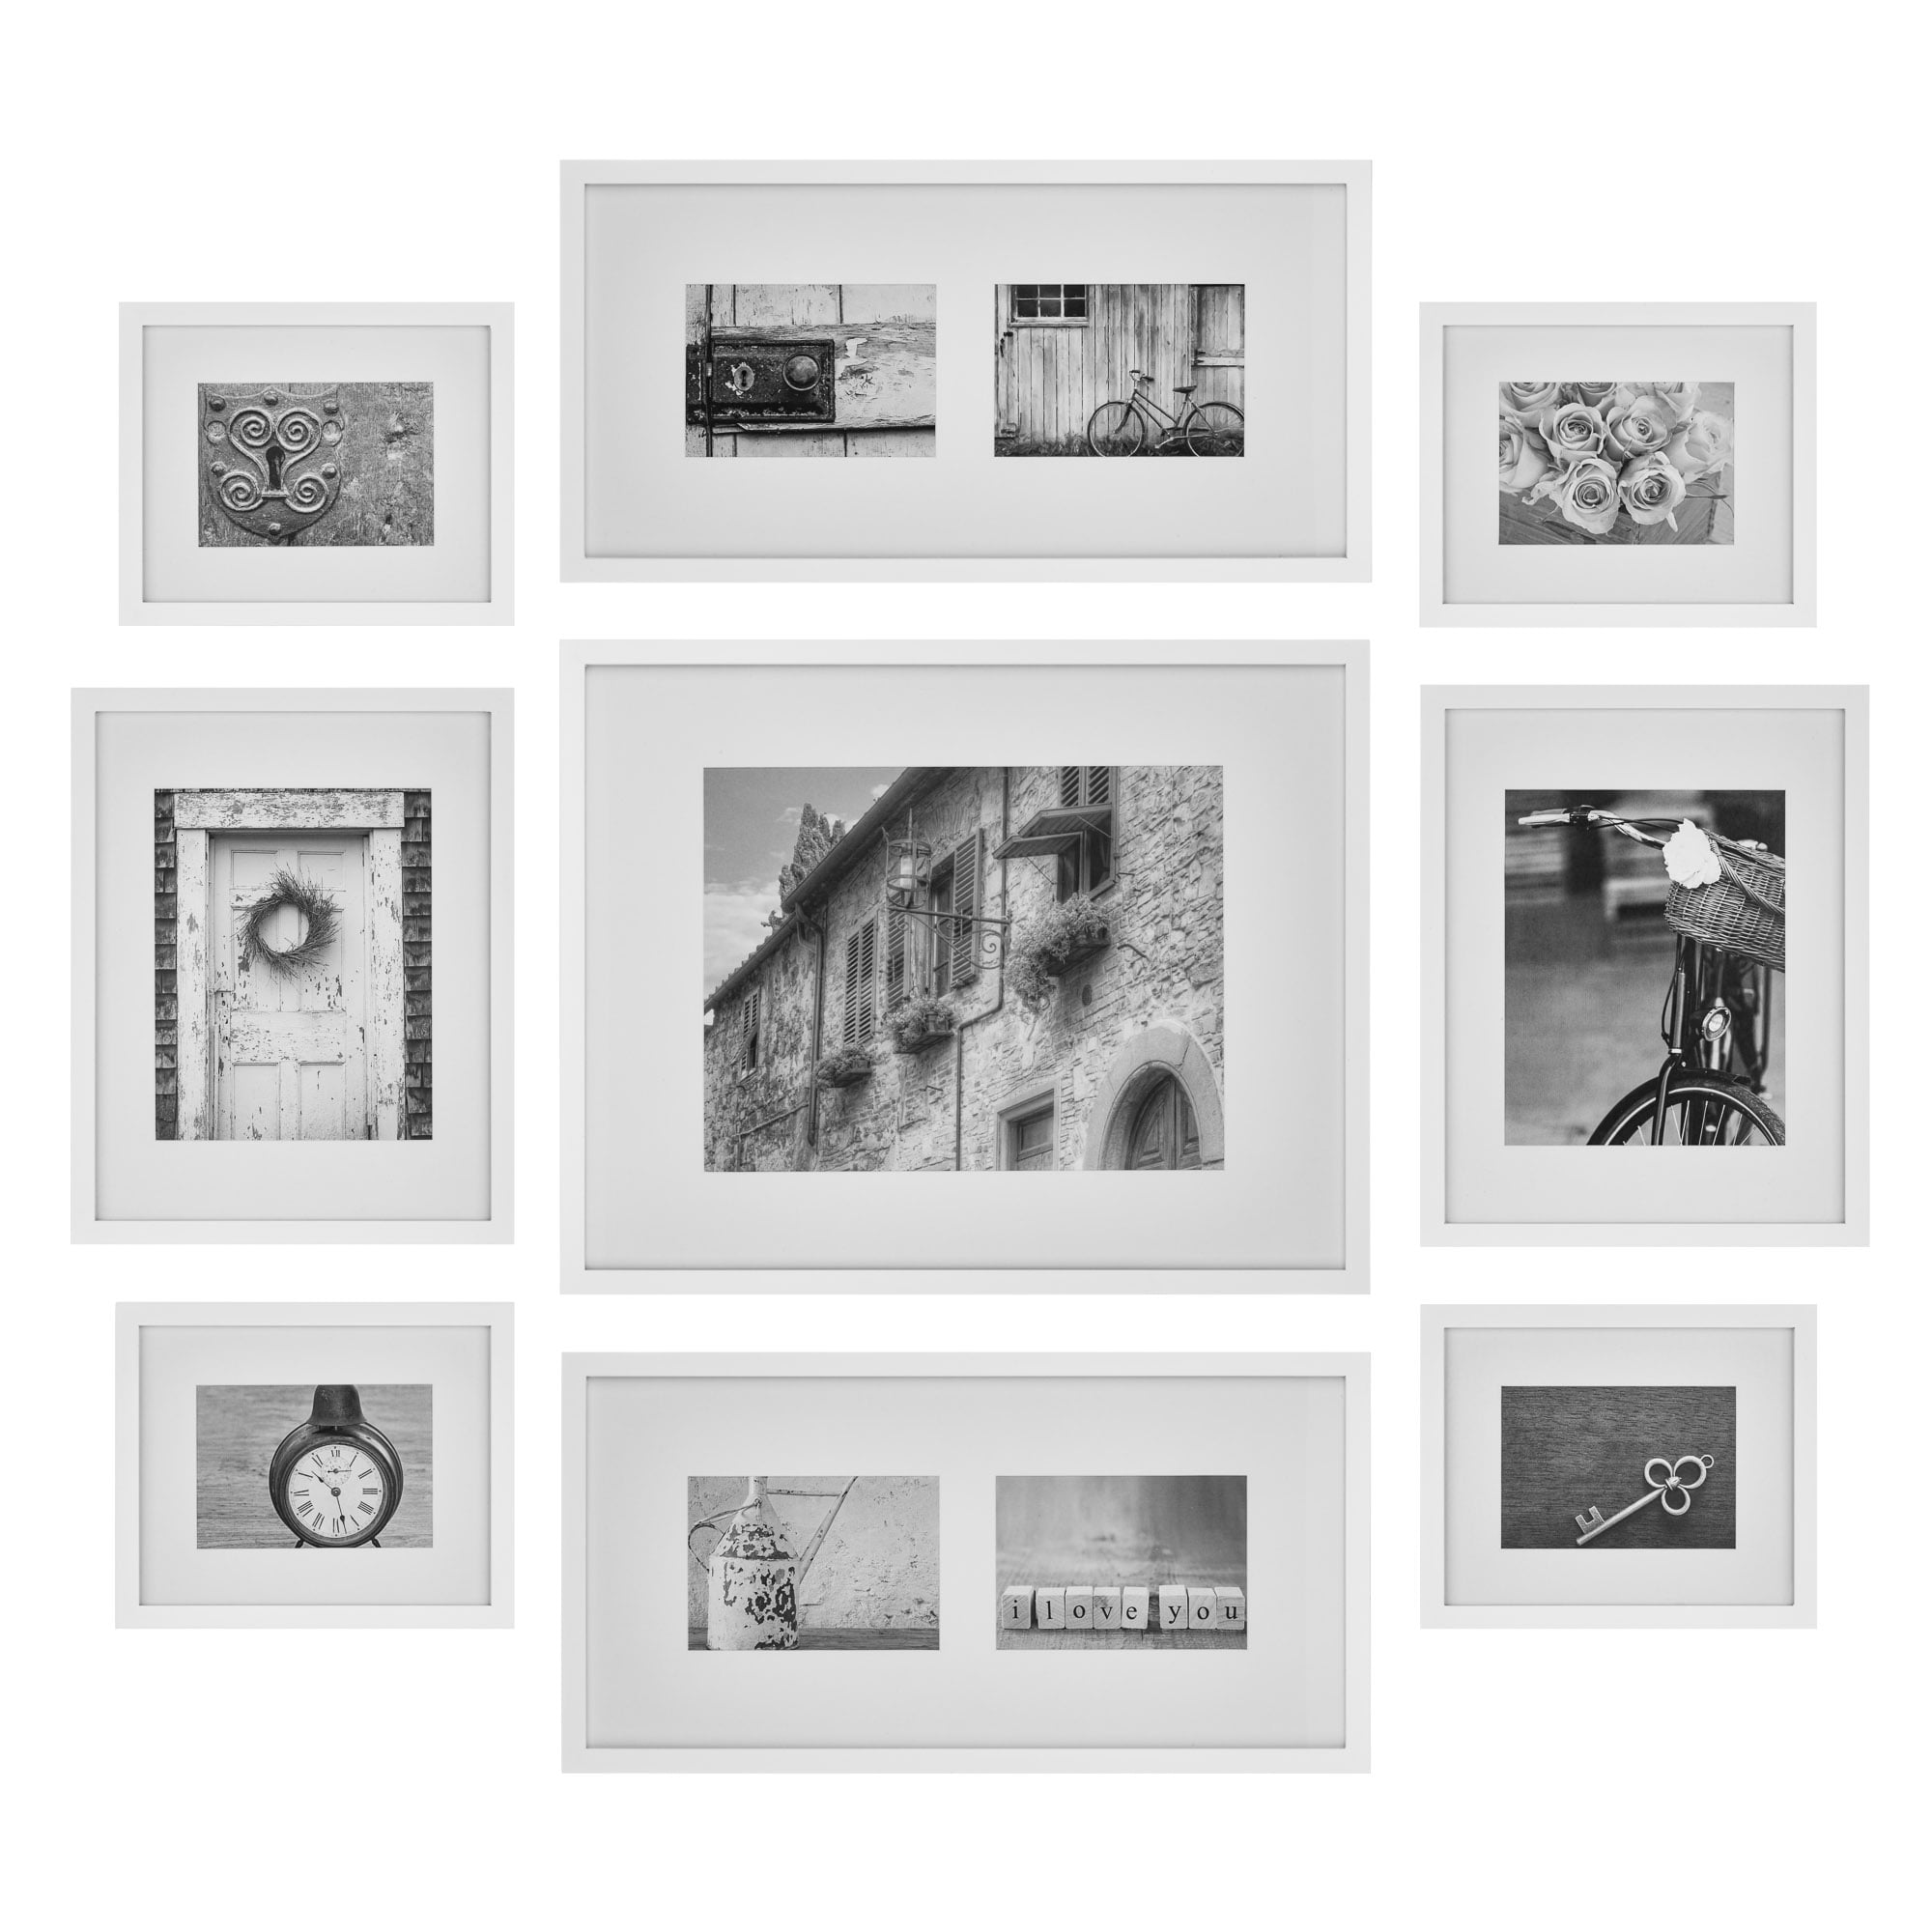  Fixwal Picture Frames Set of 10, Photo Frame Set with 4×6 5x7  8x10 frames for Wall Collage and Tabletop Display, Gallery Wall Frames in 3  Different Finishes including Brown,Grey and Black